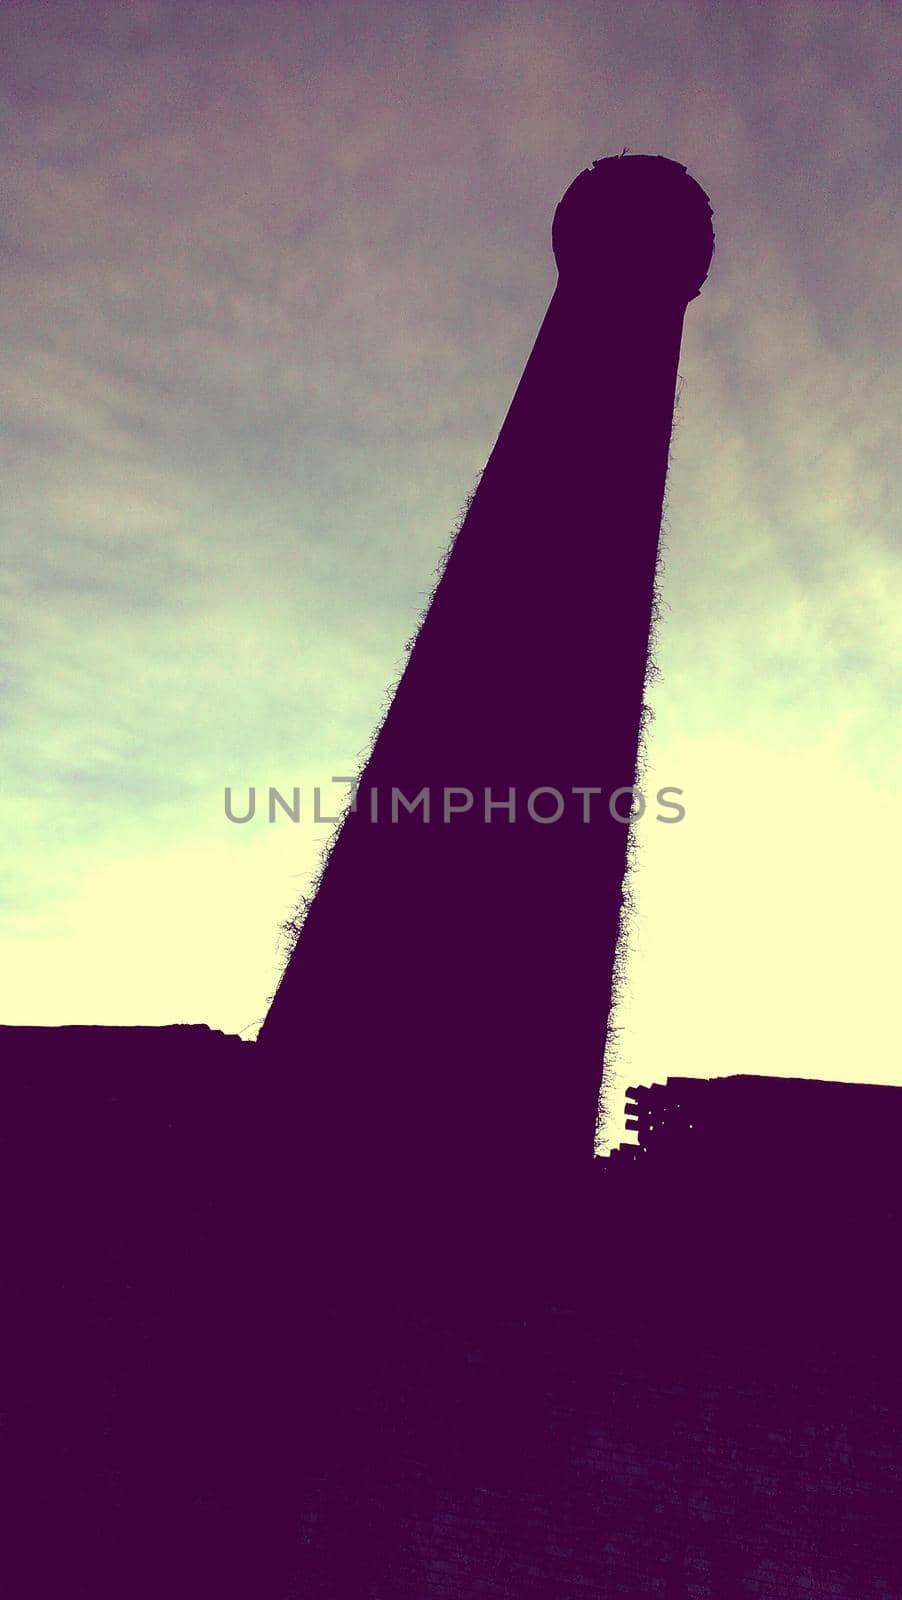 Image of Tall tower silhouetted against a light sky